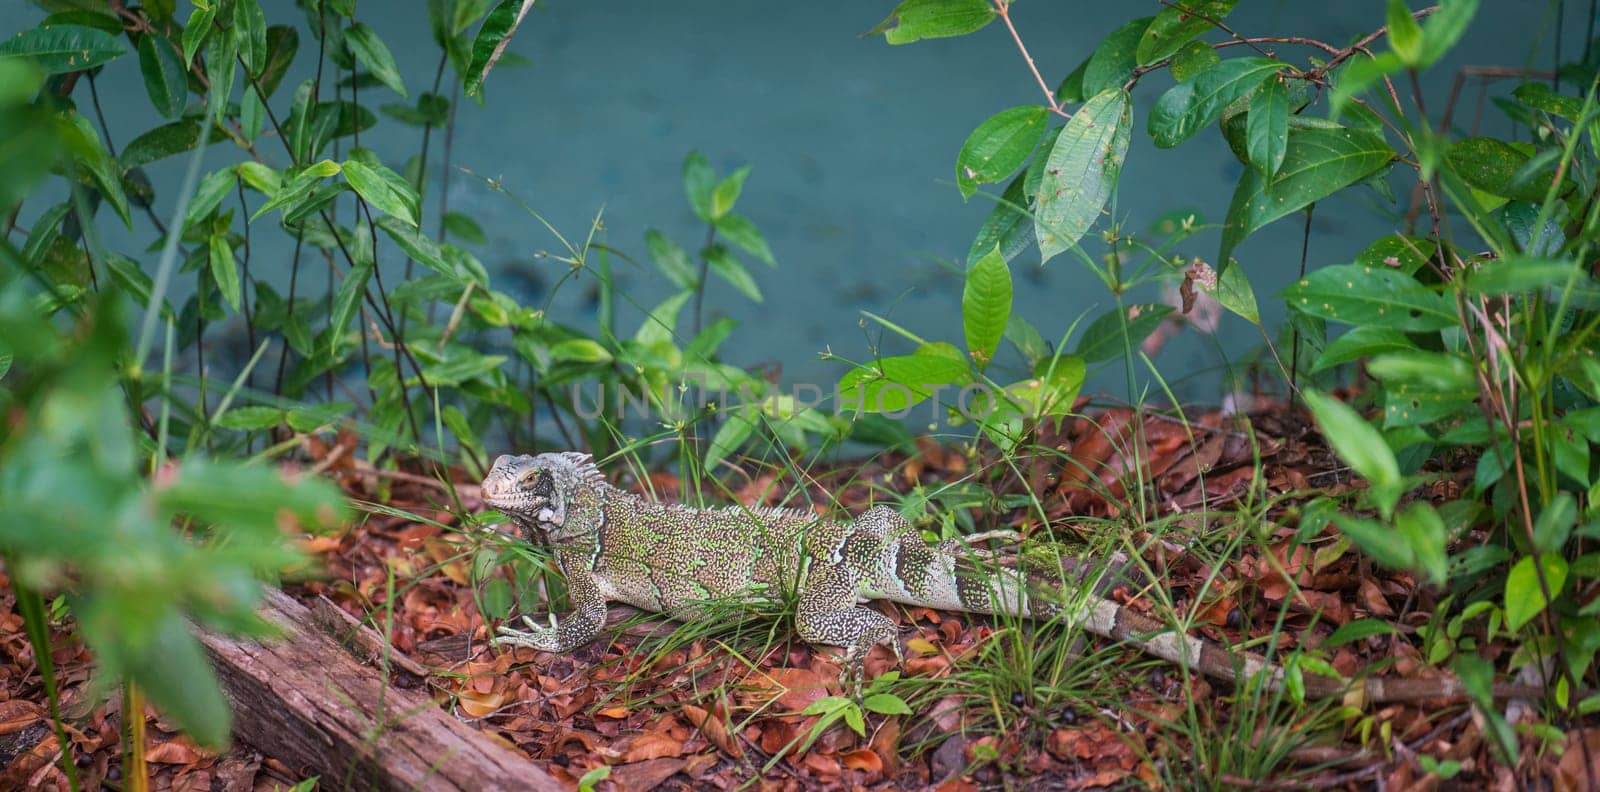 A close-up view of an iguana walking on brown leaves of the tropical rainforest near a green river. Beautiful green scenery surrounds it.